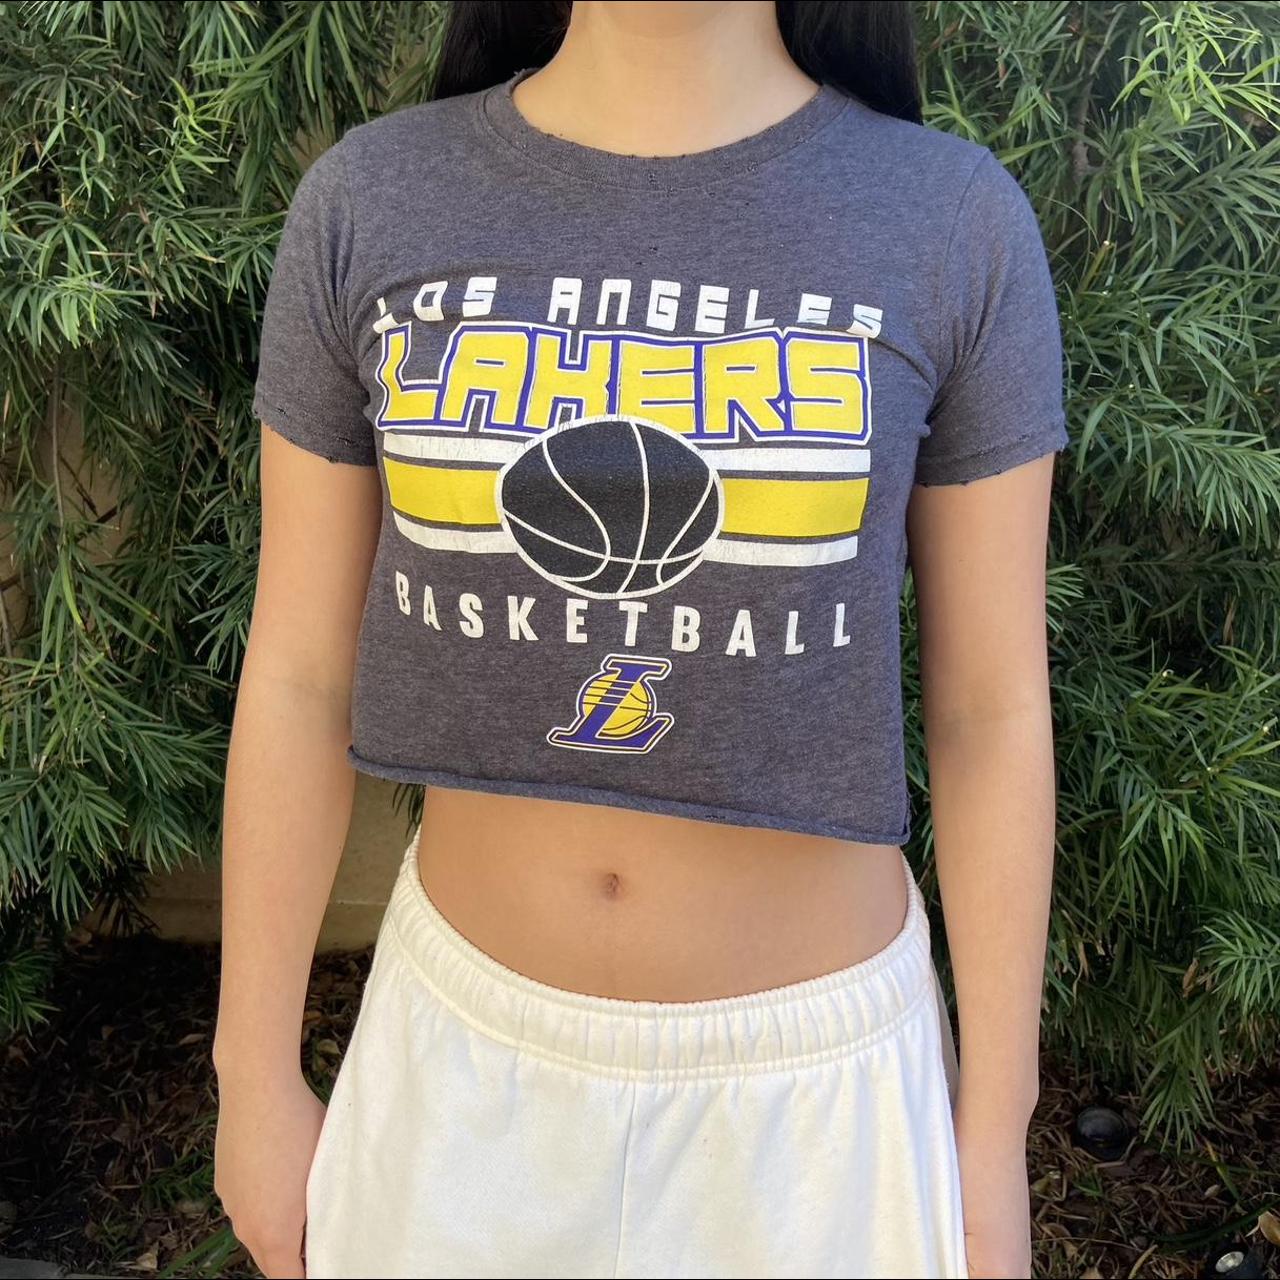 cropped lakers shirt